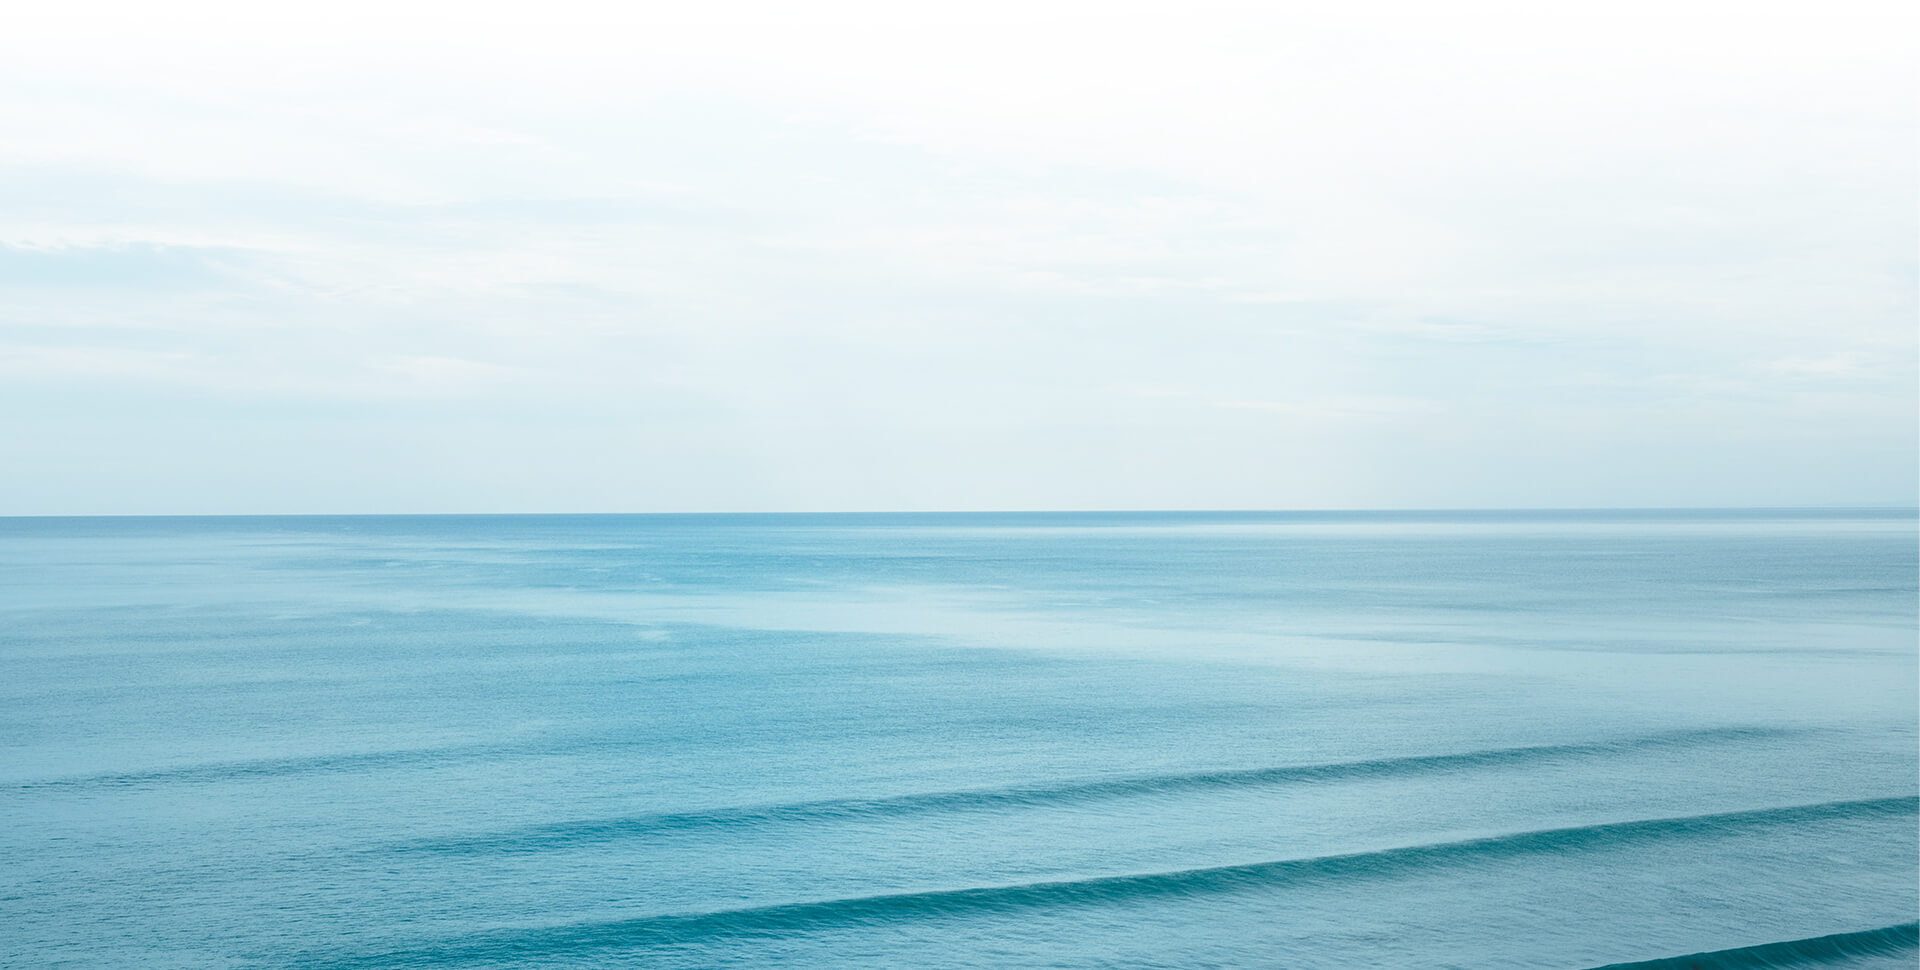 A blue ocean with waves in the distance.